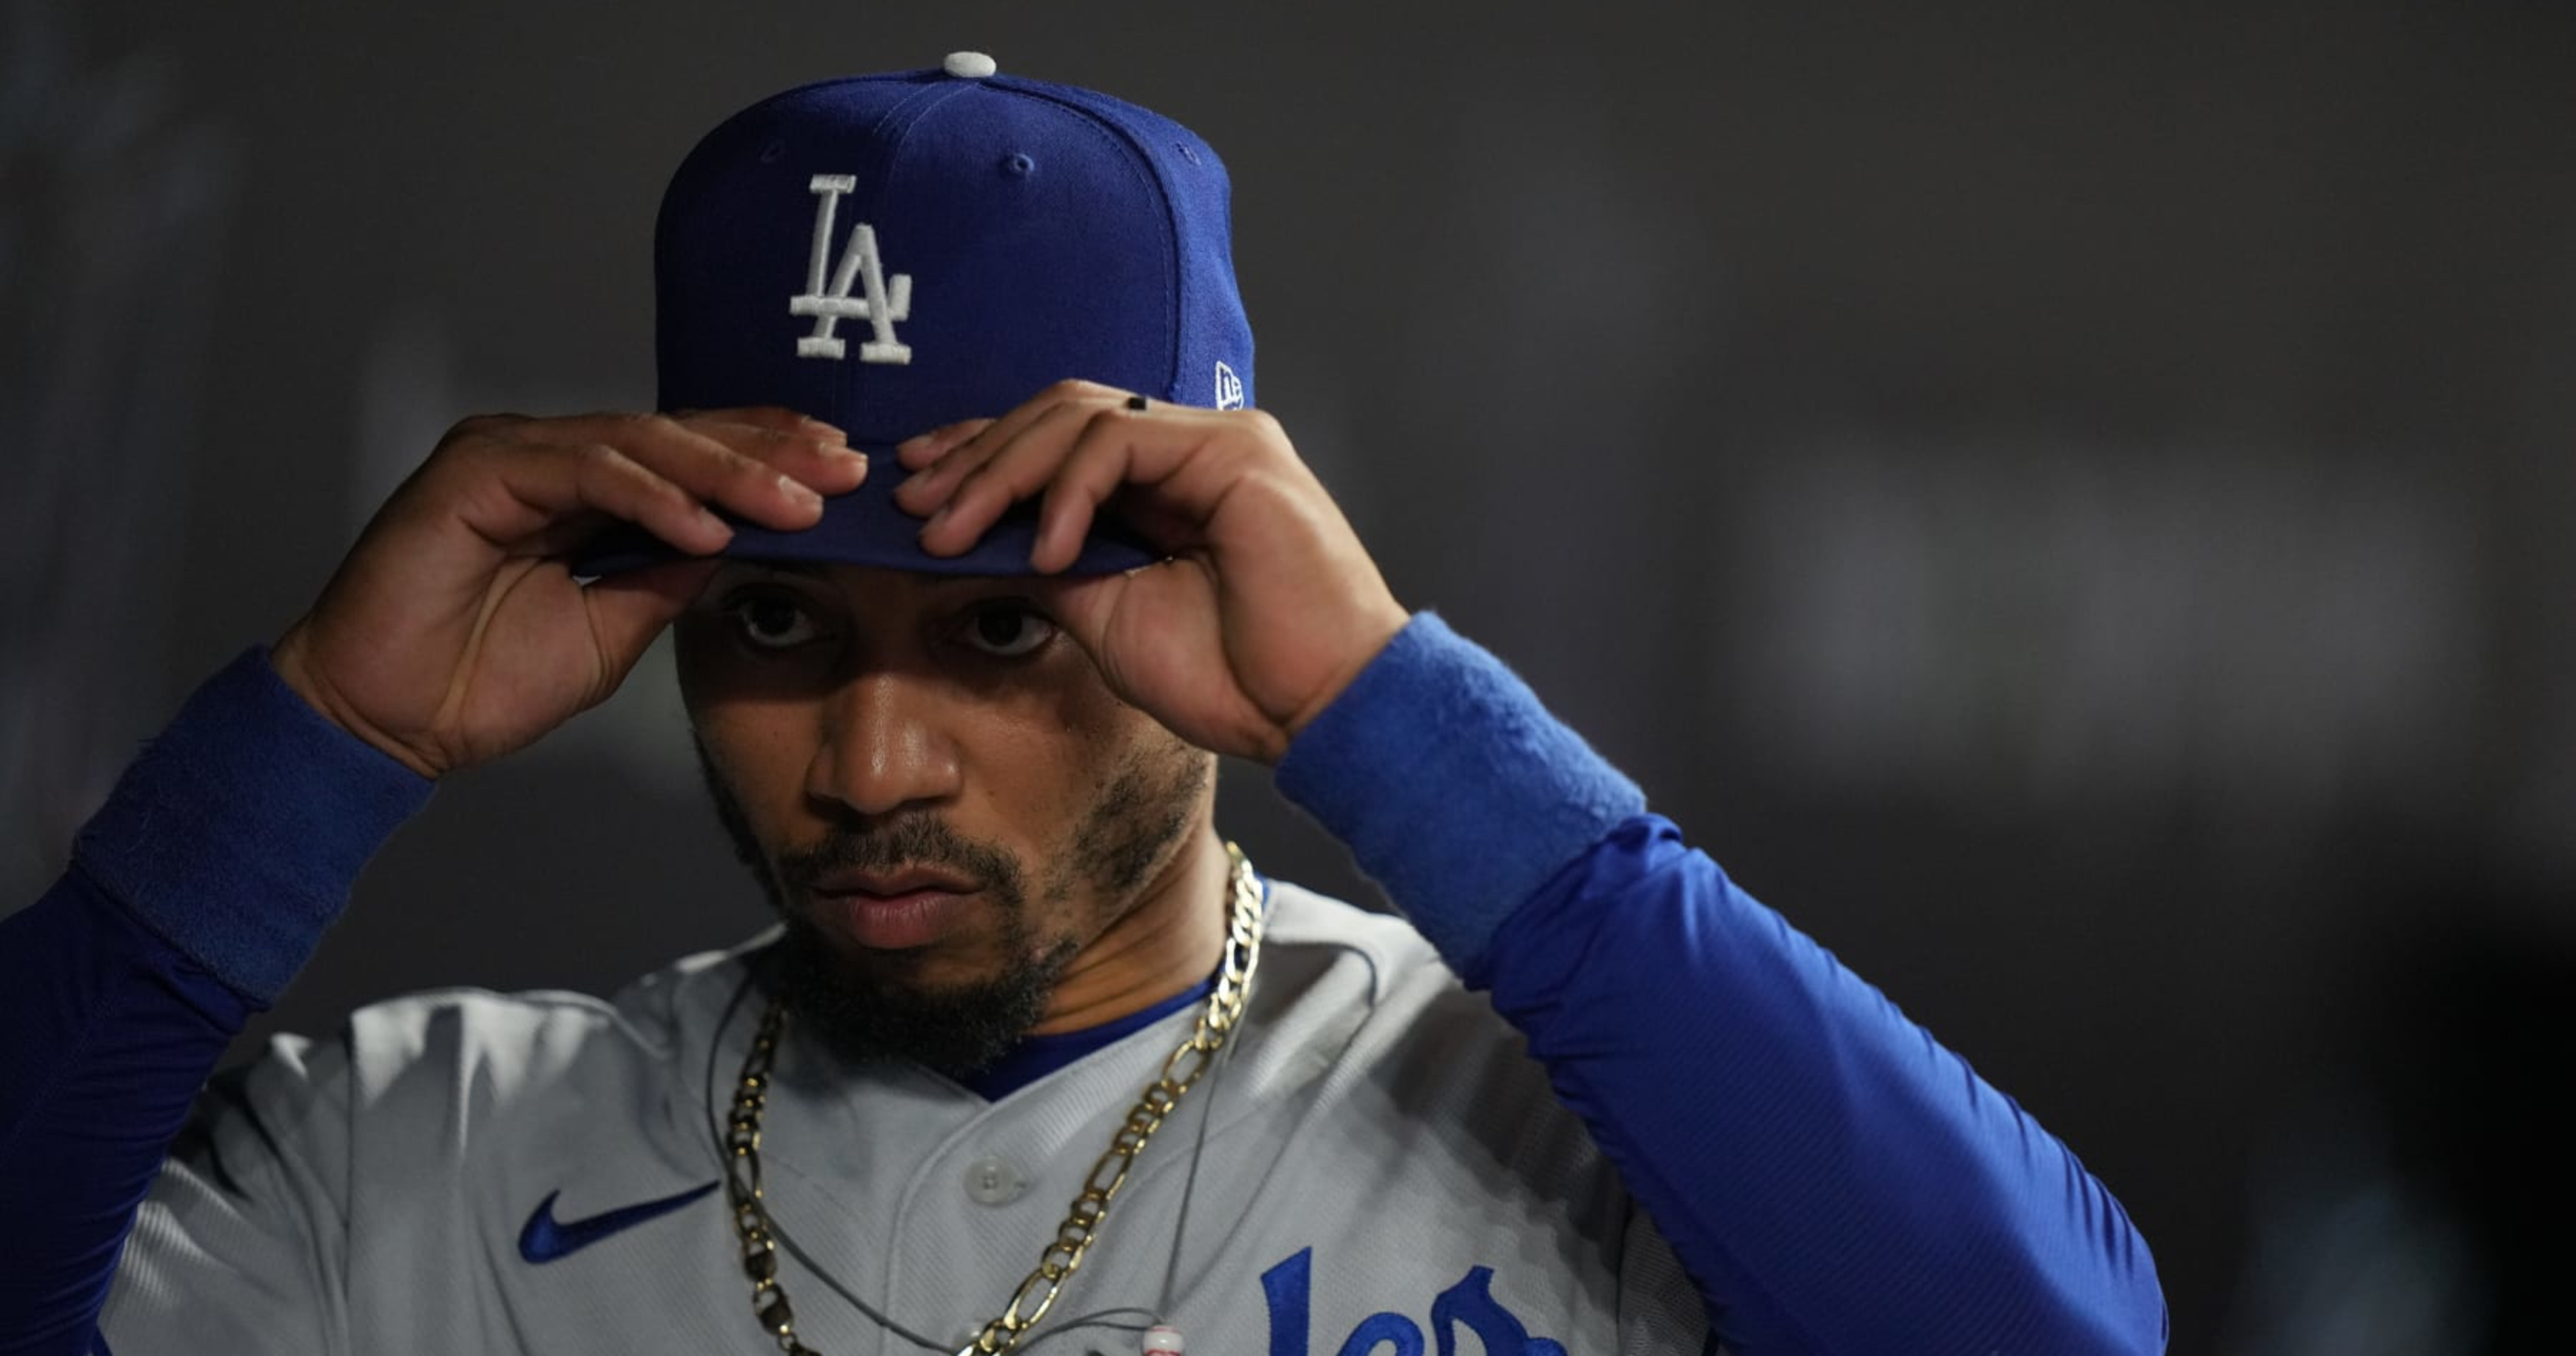 Dodgers insider goes off the rails with questionable Mookie Betts take